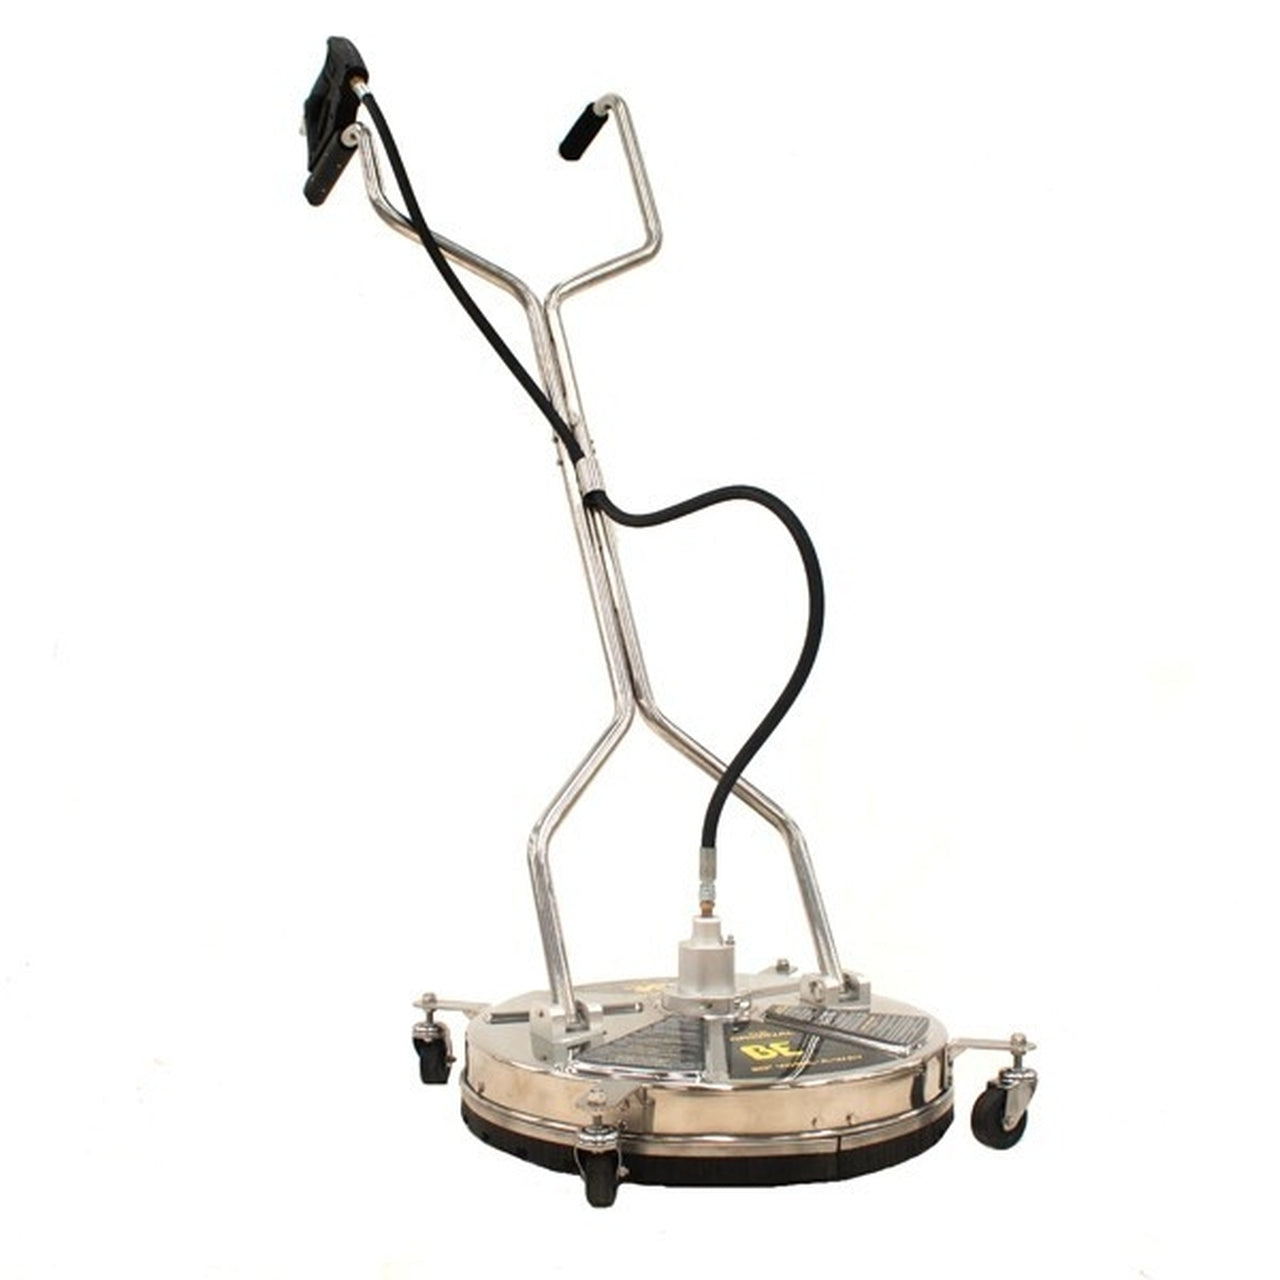 BE 85.403.009 Pressure Whirl-A-Way 20" Stainless Steel Flat Surface Cleaner